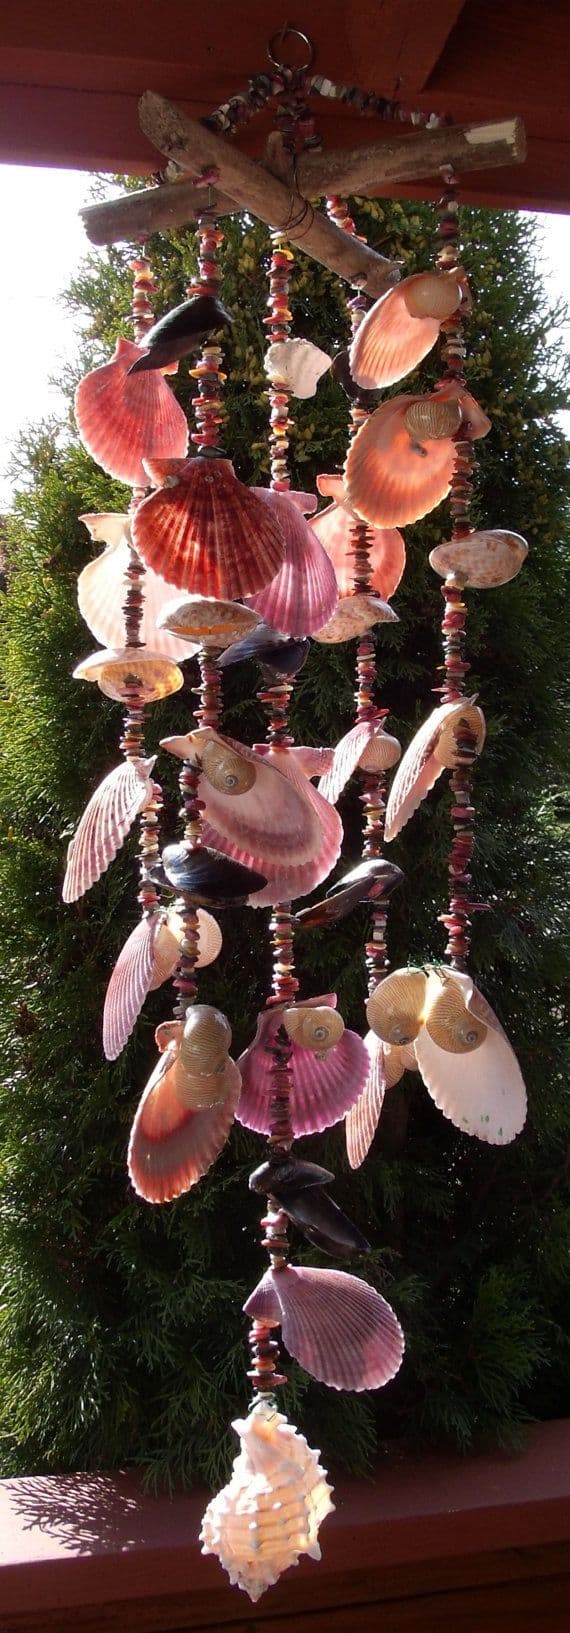 21 Sea Shell Projects To Consider On Your Next Walk By The Beach (11)